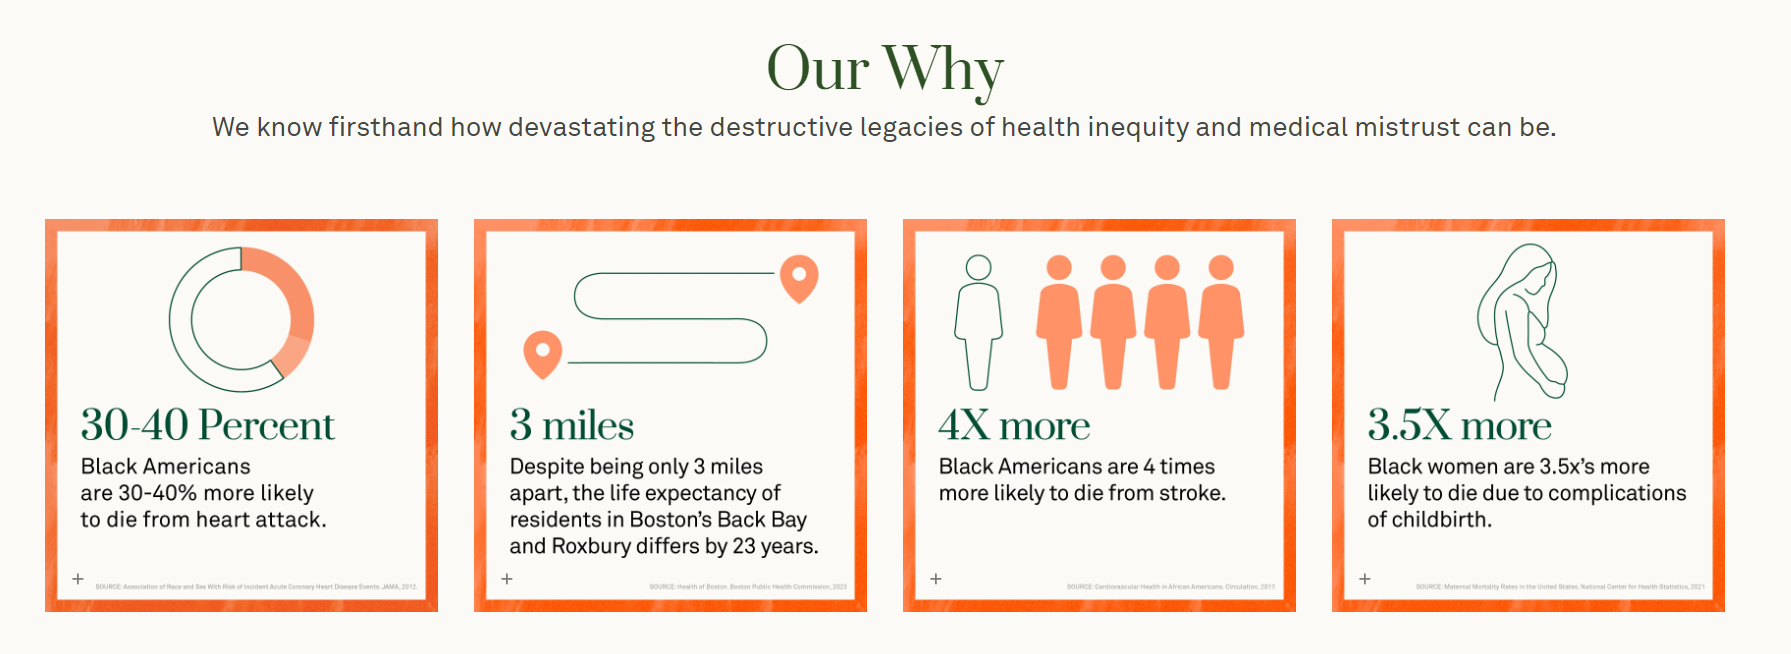 Our Why infographic